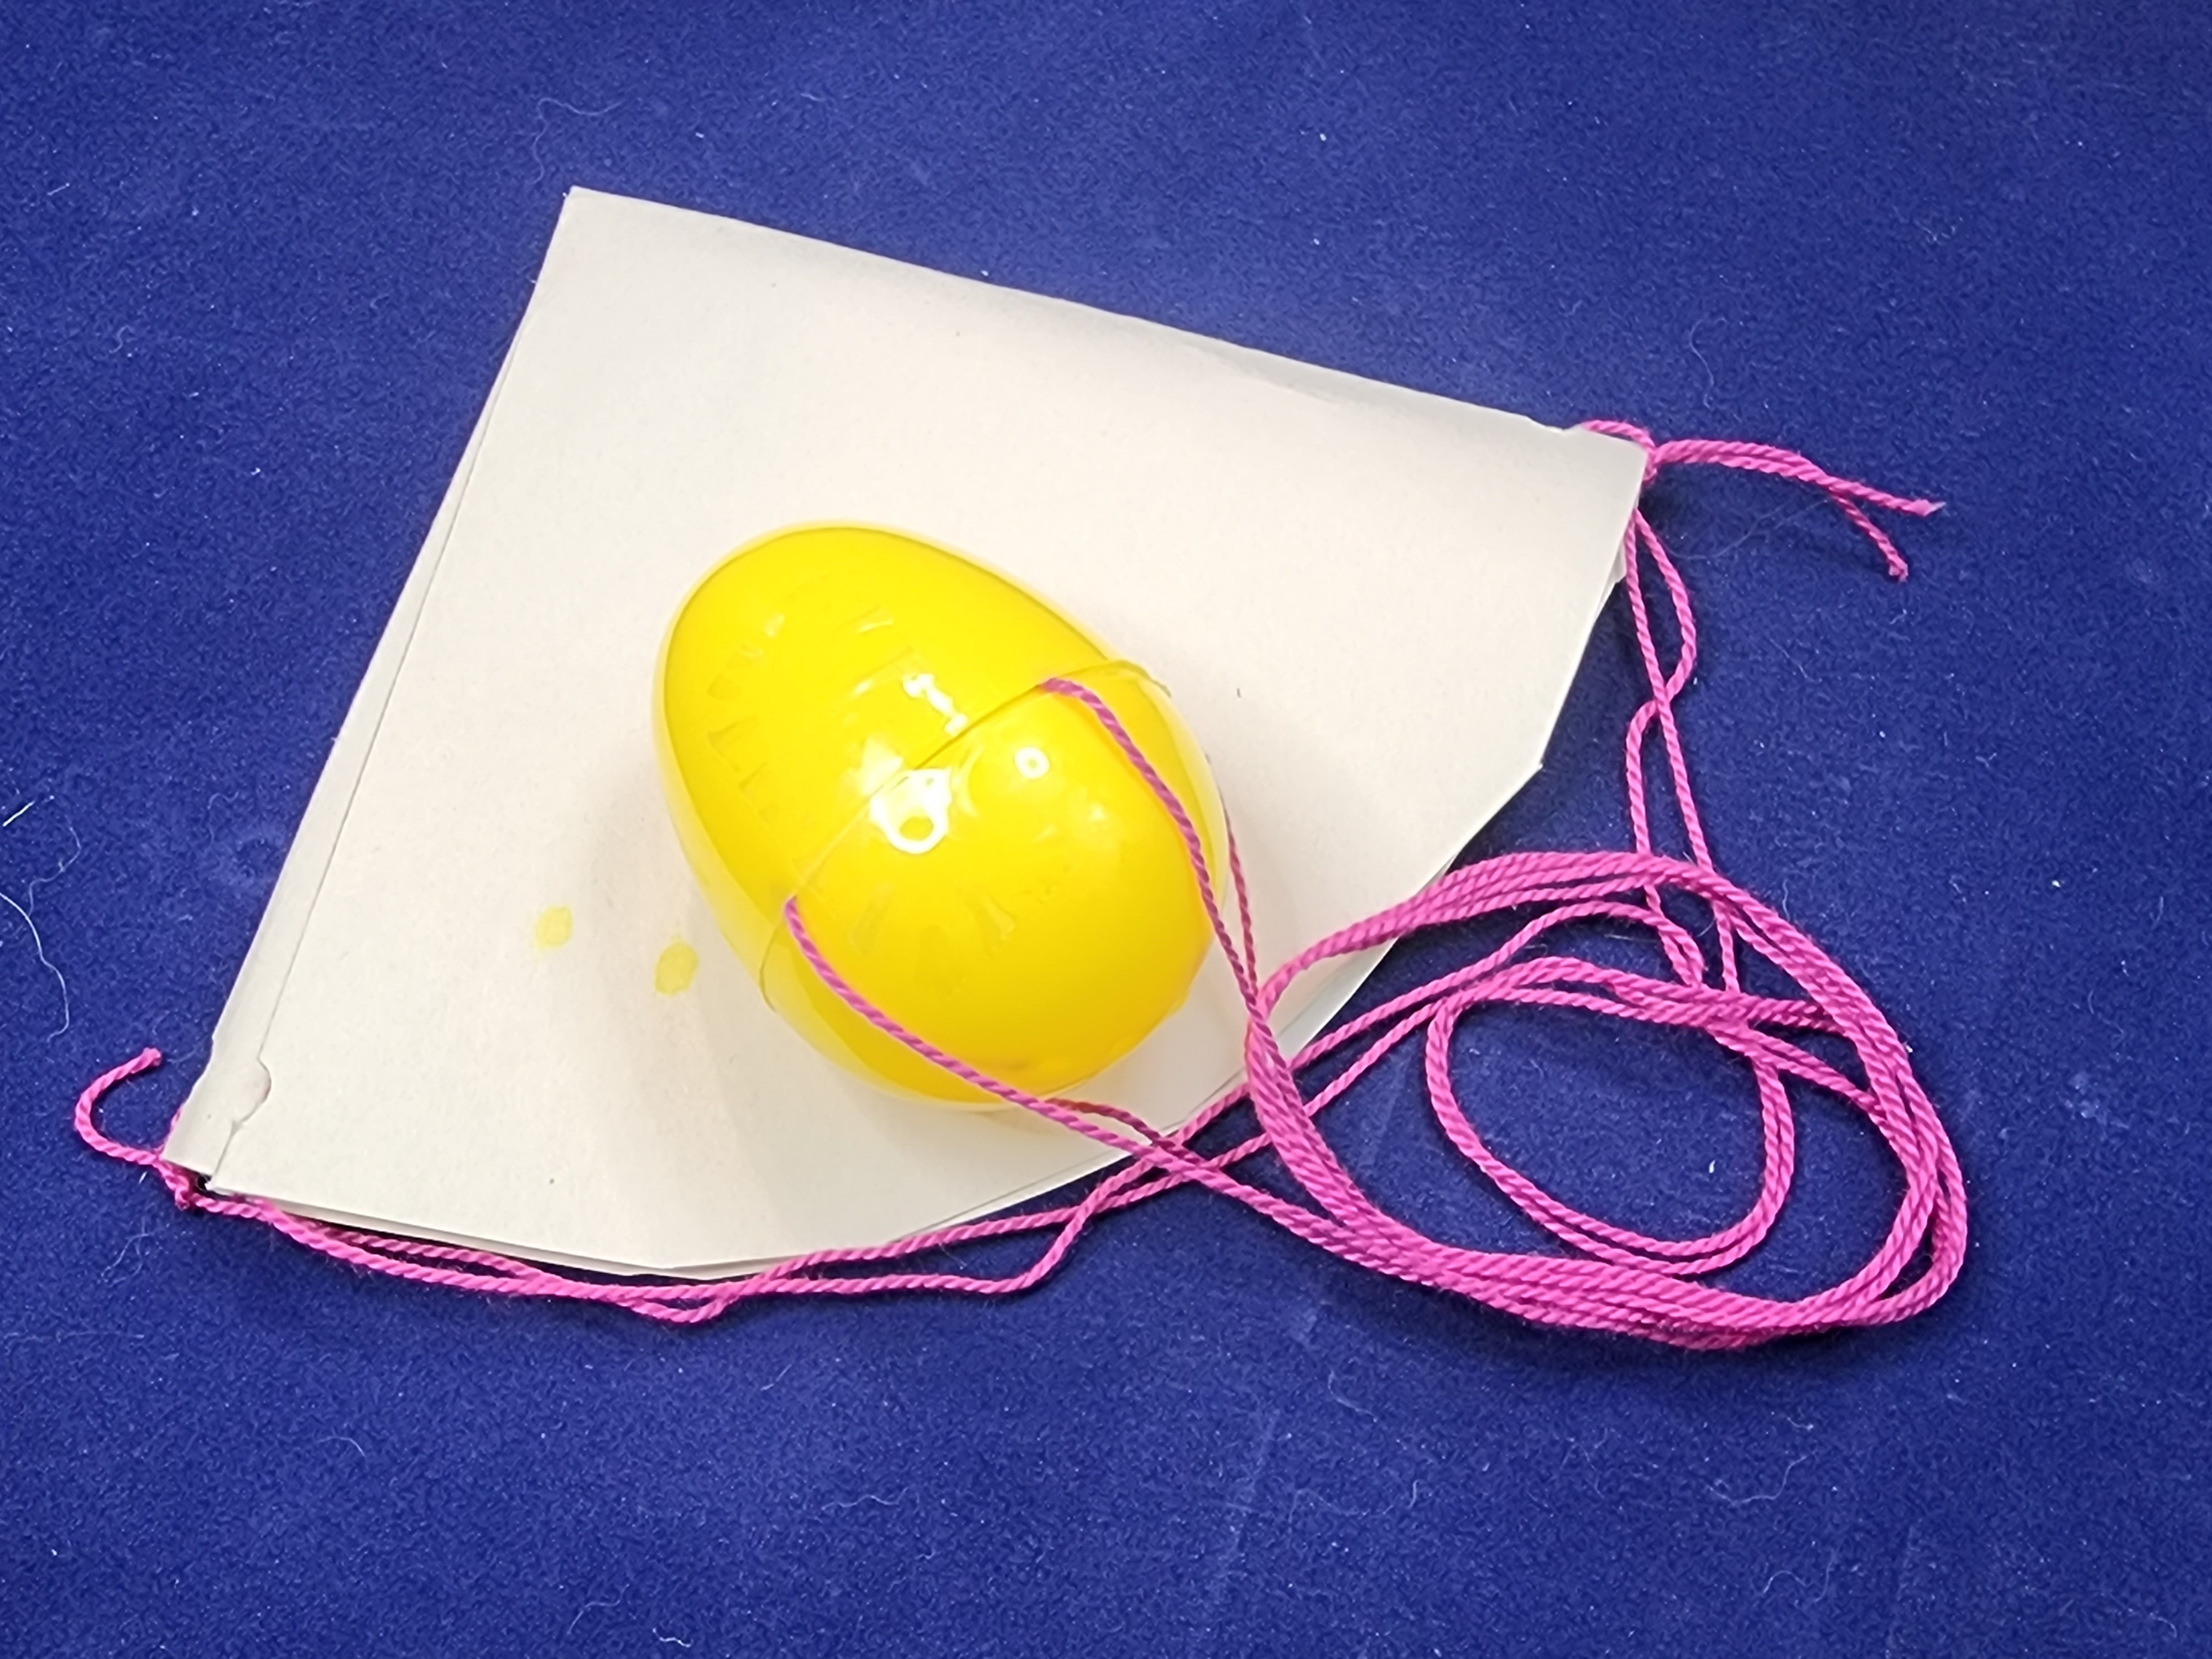 A plastic egg with strings attached which connect to a paper parachute.